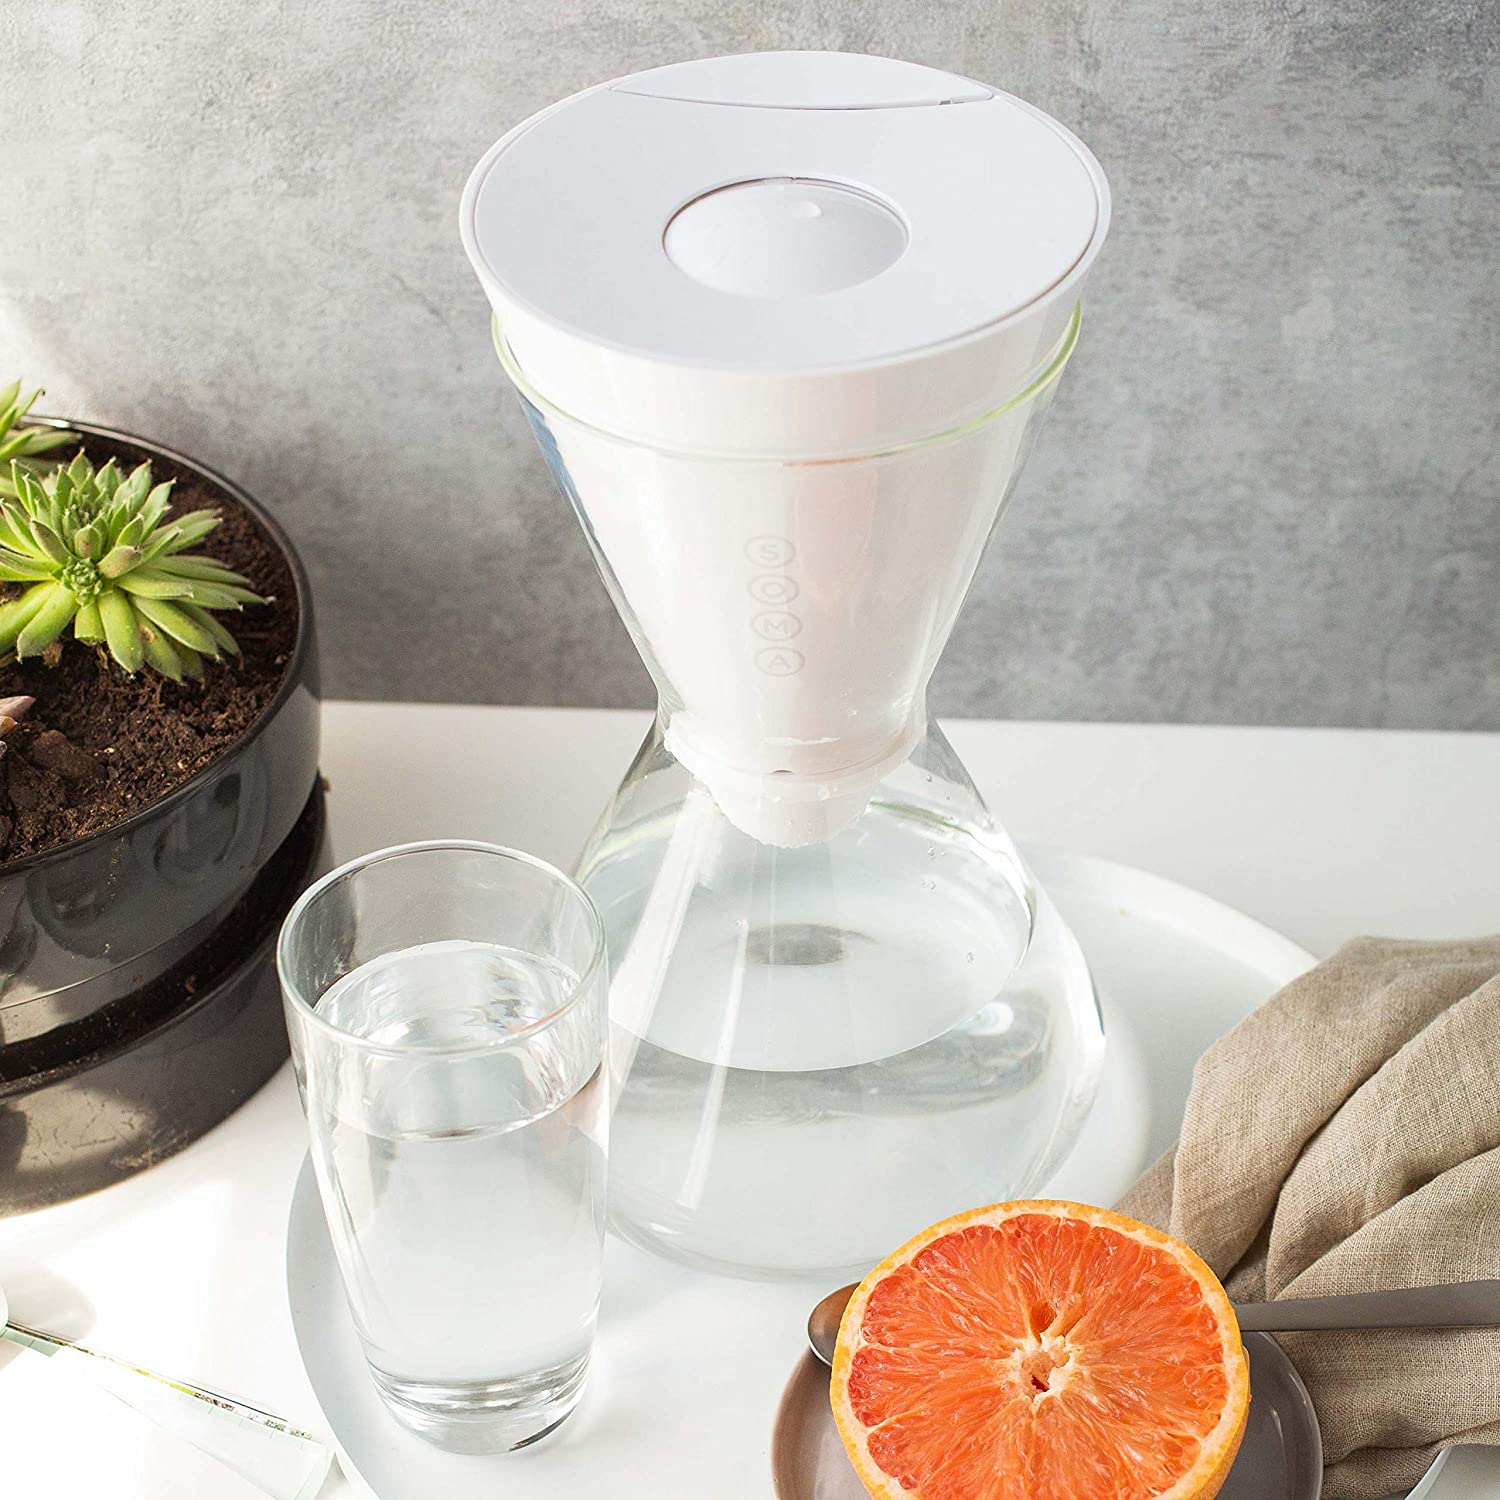 Soma's Simple Water Filtration System